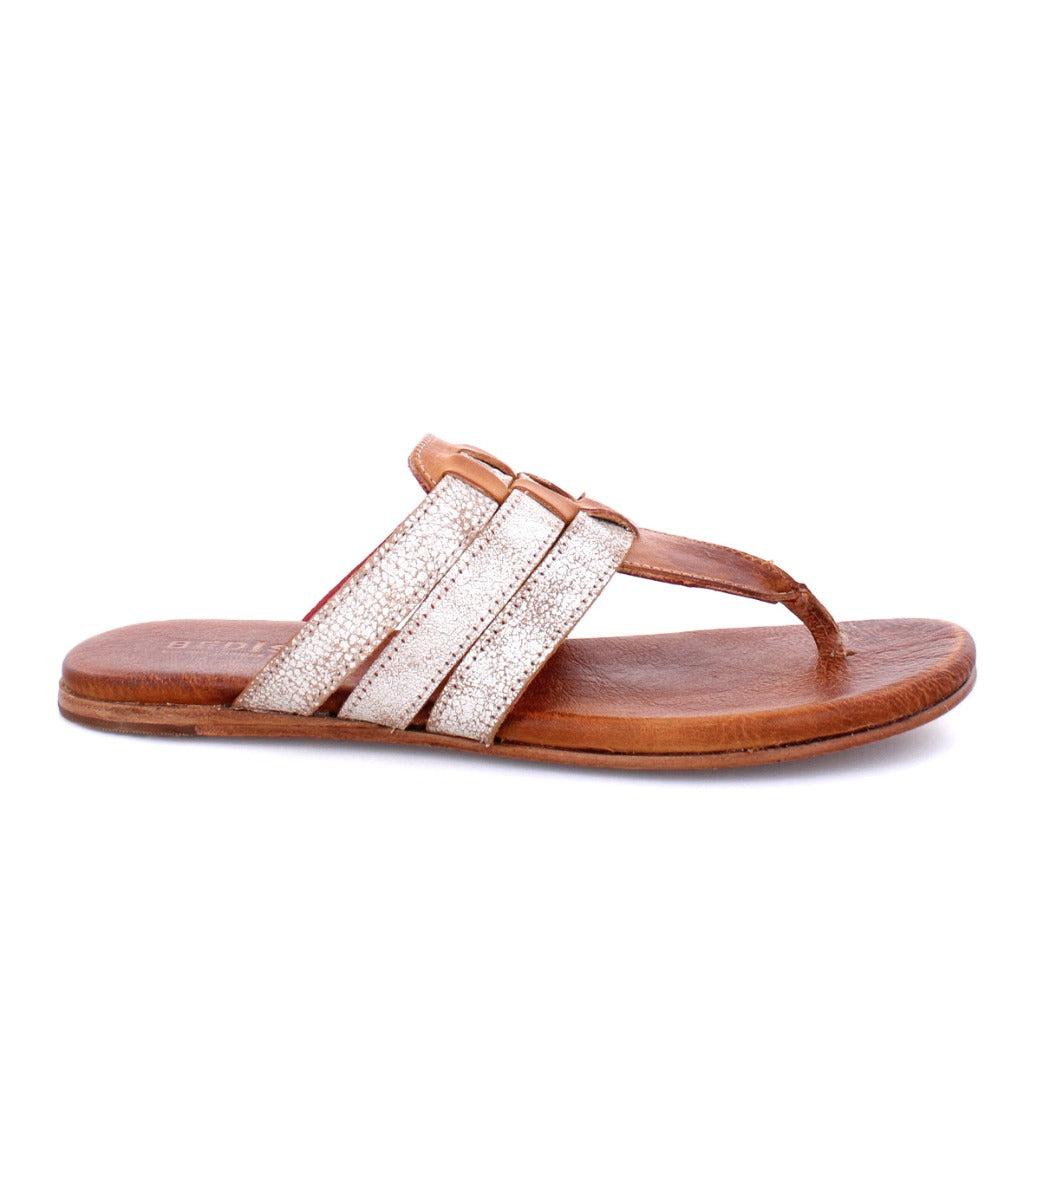 A pair of Bed Stu Yoli women's sandals with white and tan leather.